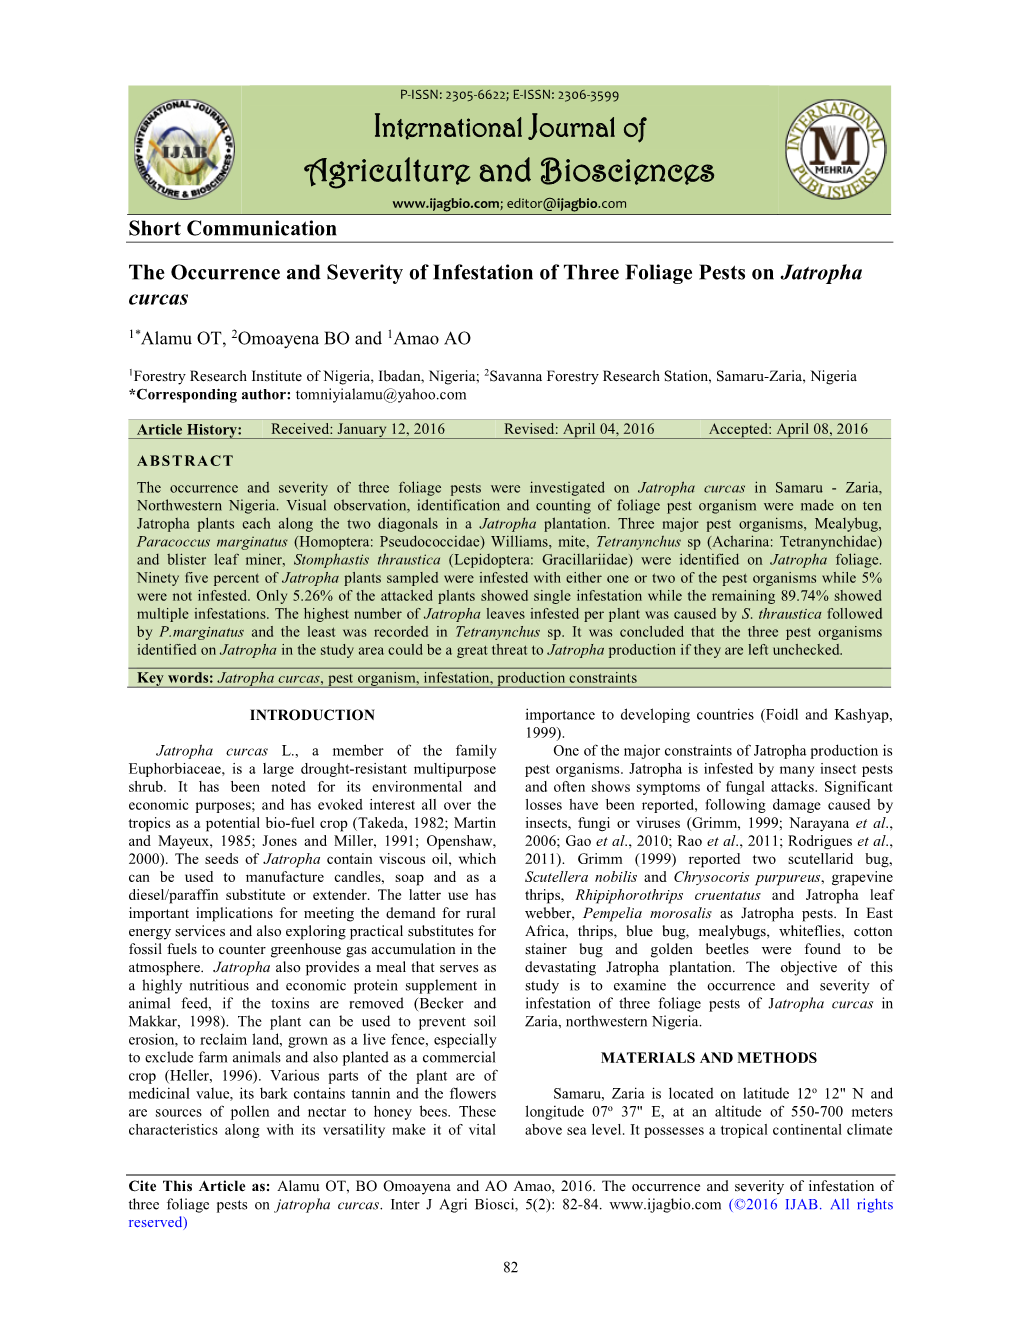 International Journal of Agriculture and Biosciences